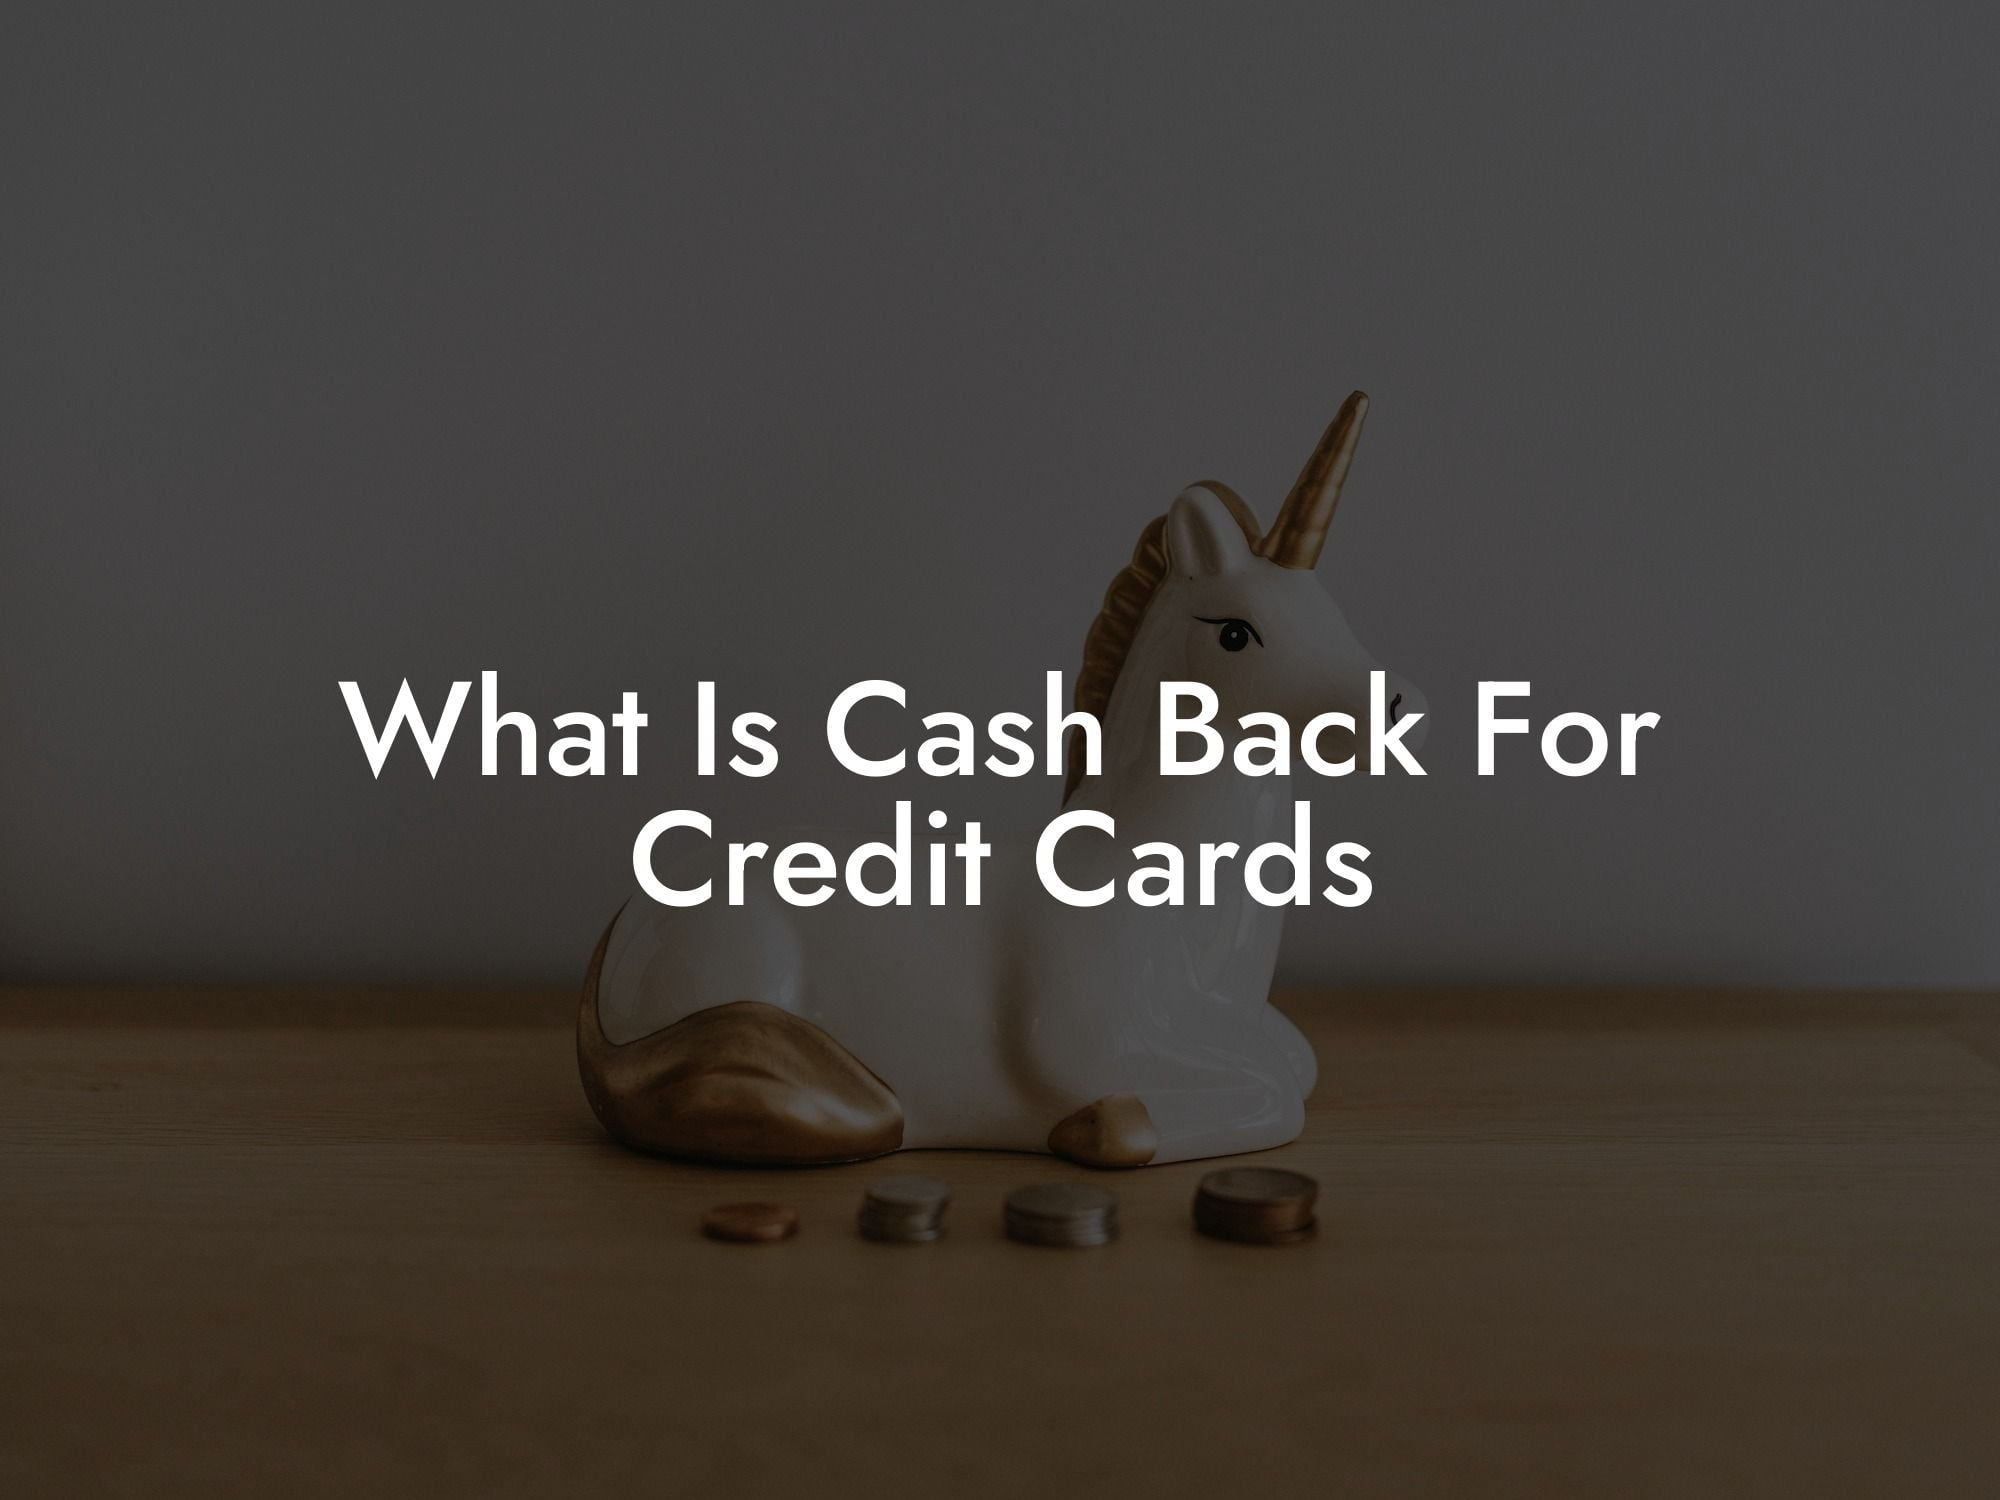 What Is Cash Back For Credit Cards